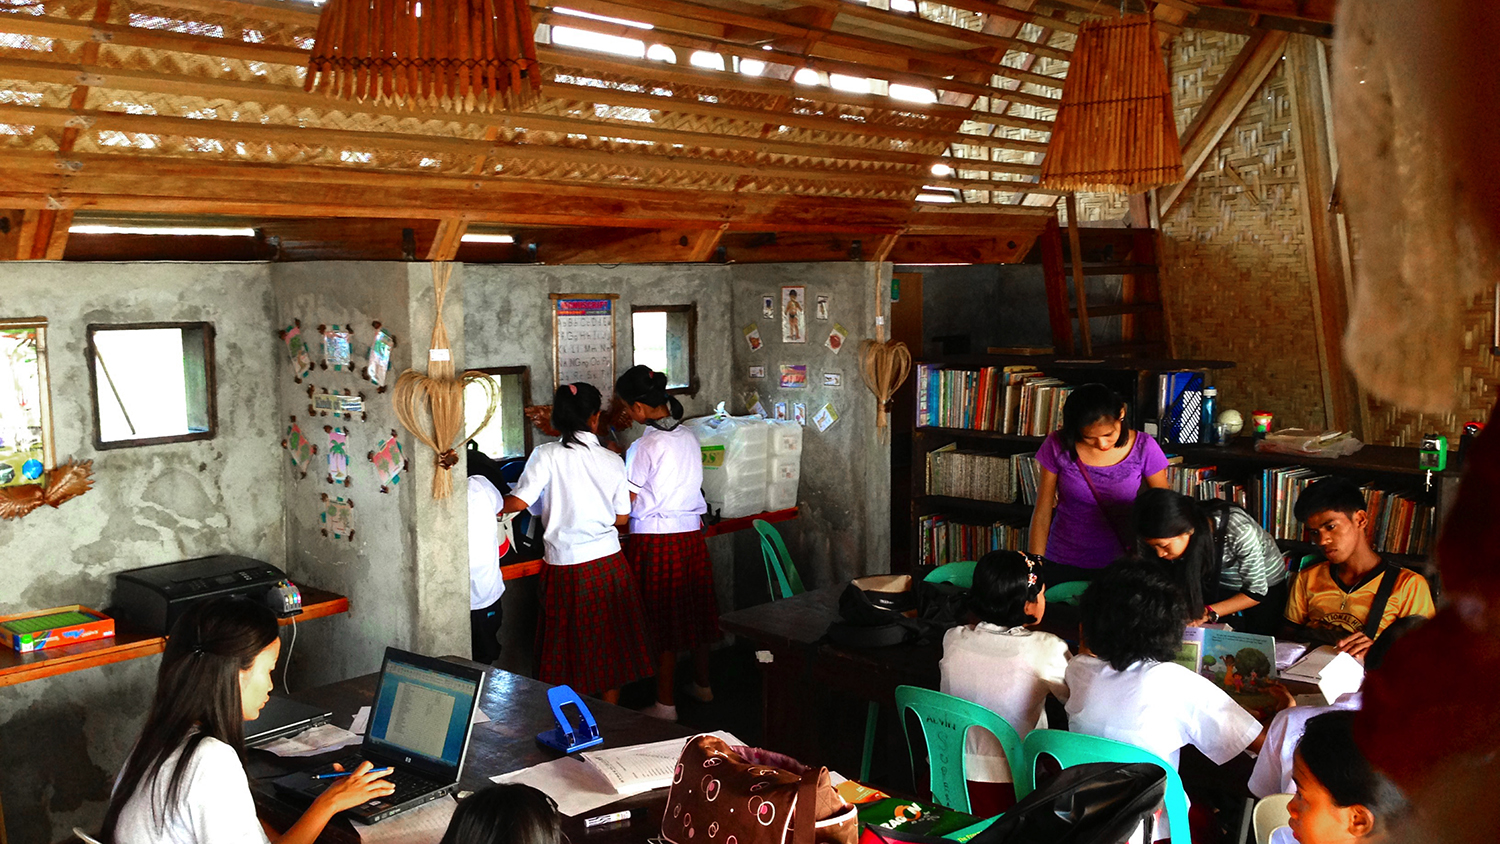 Inside the study center while building in use